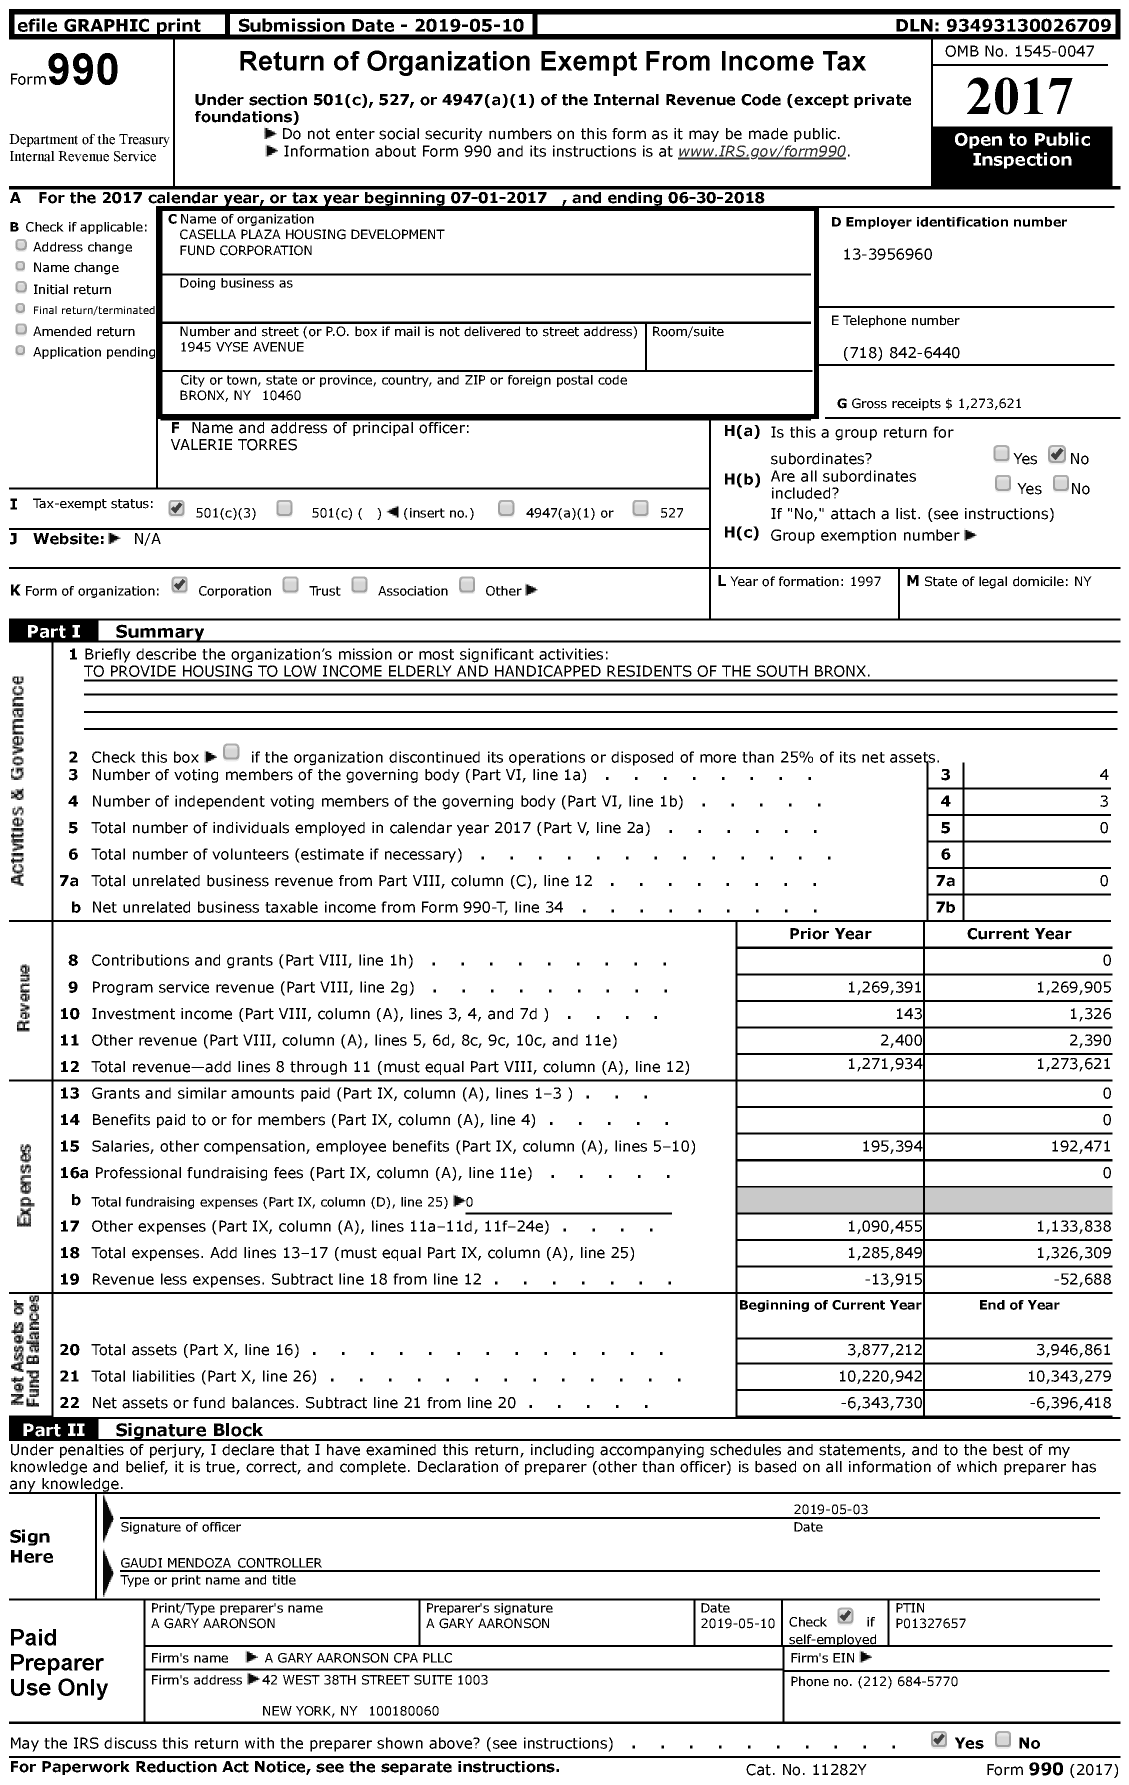 Image of first page of 2017 Form 990 for Casella Plaza Housing Development Fund Corporation